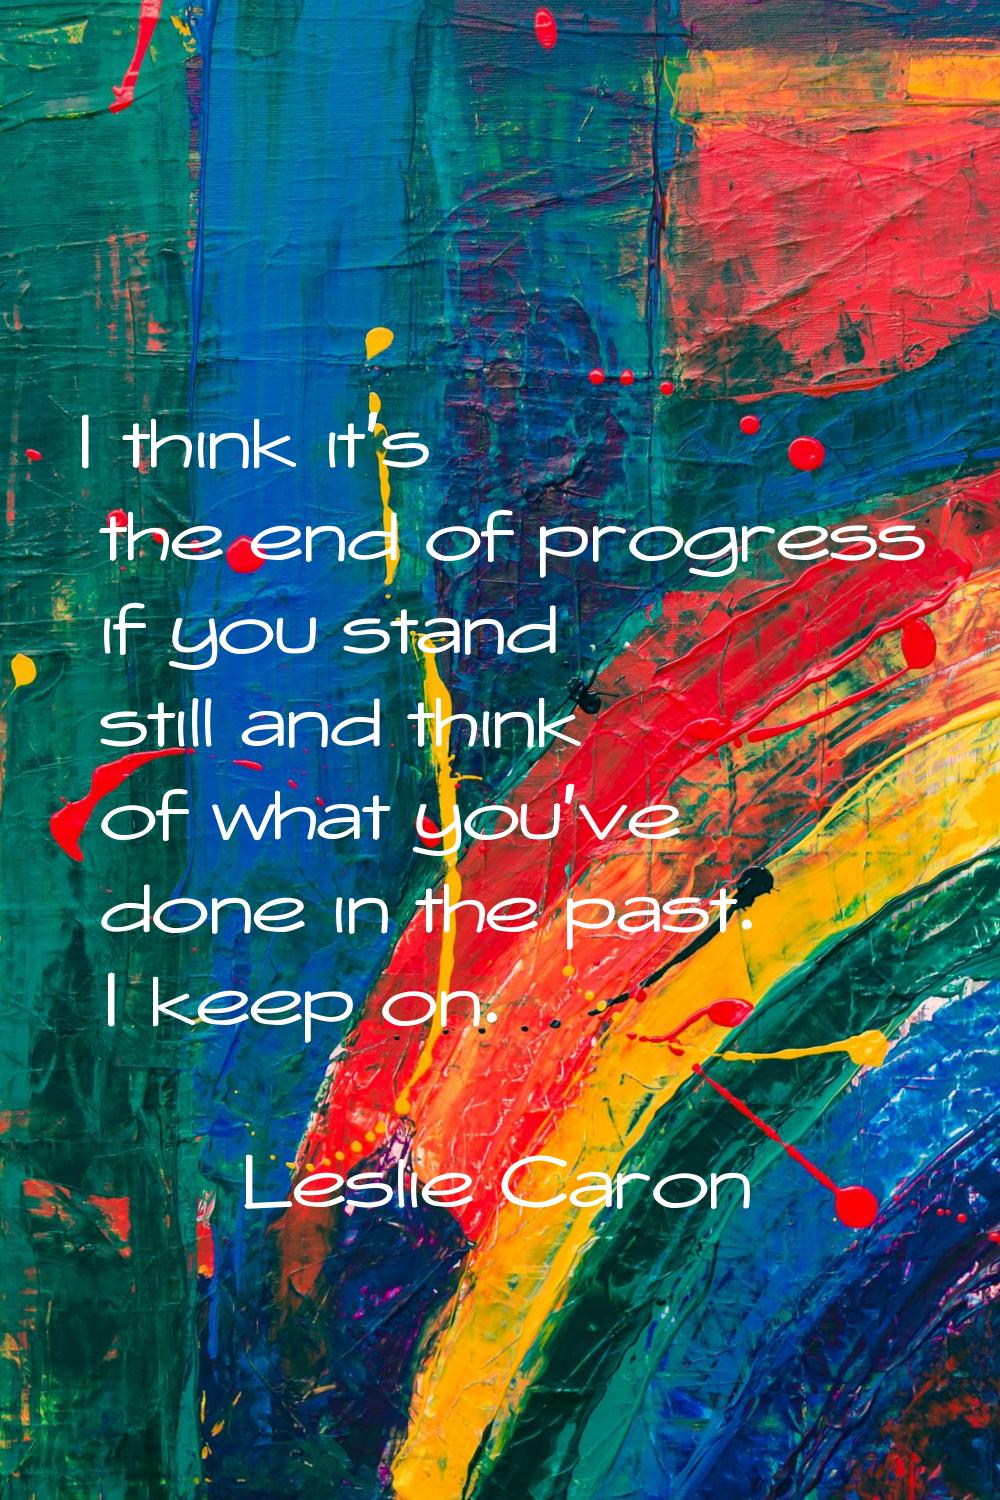 I think it's the end of progress if you stand still and think of what you've done in the past. I ke